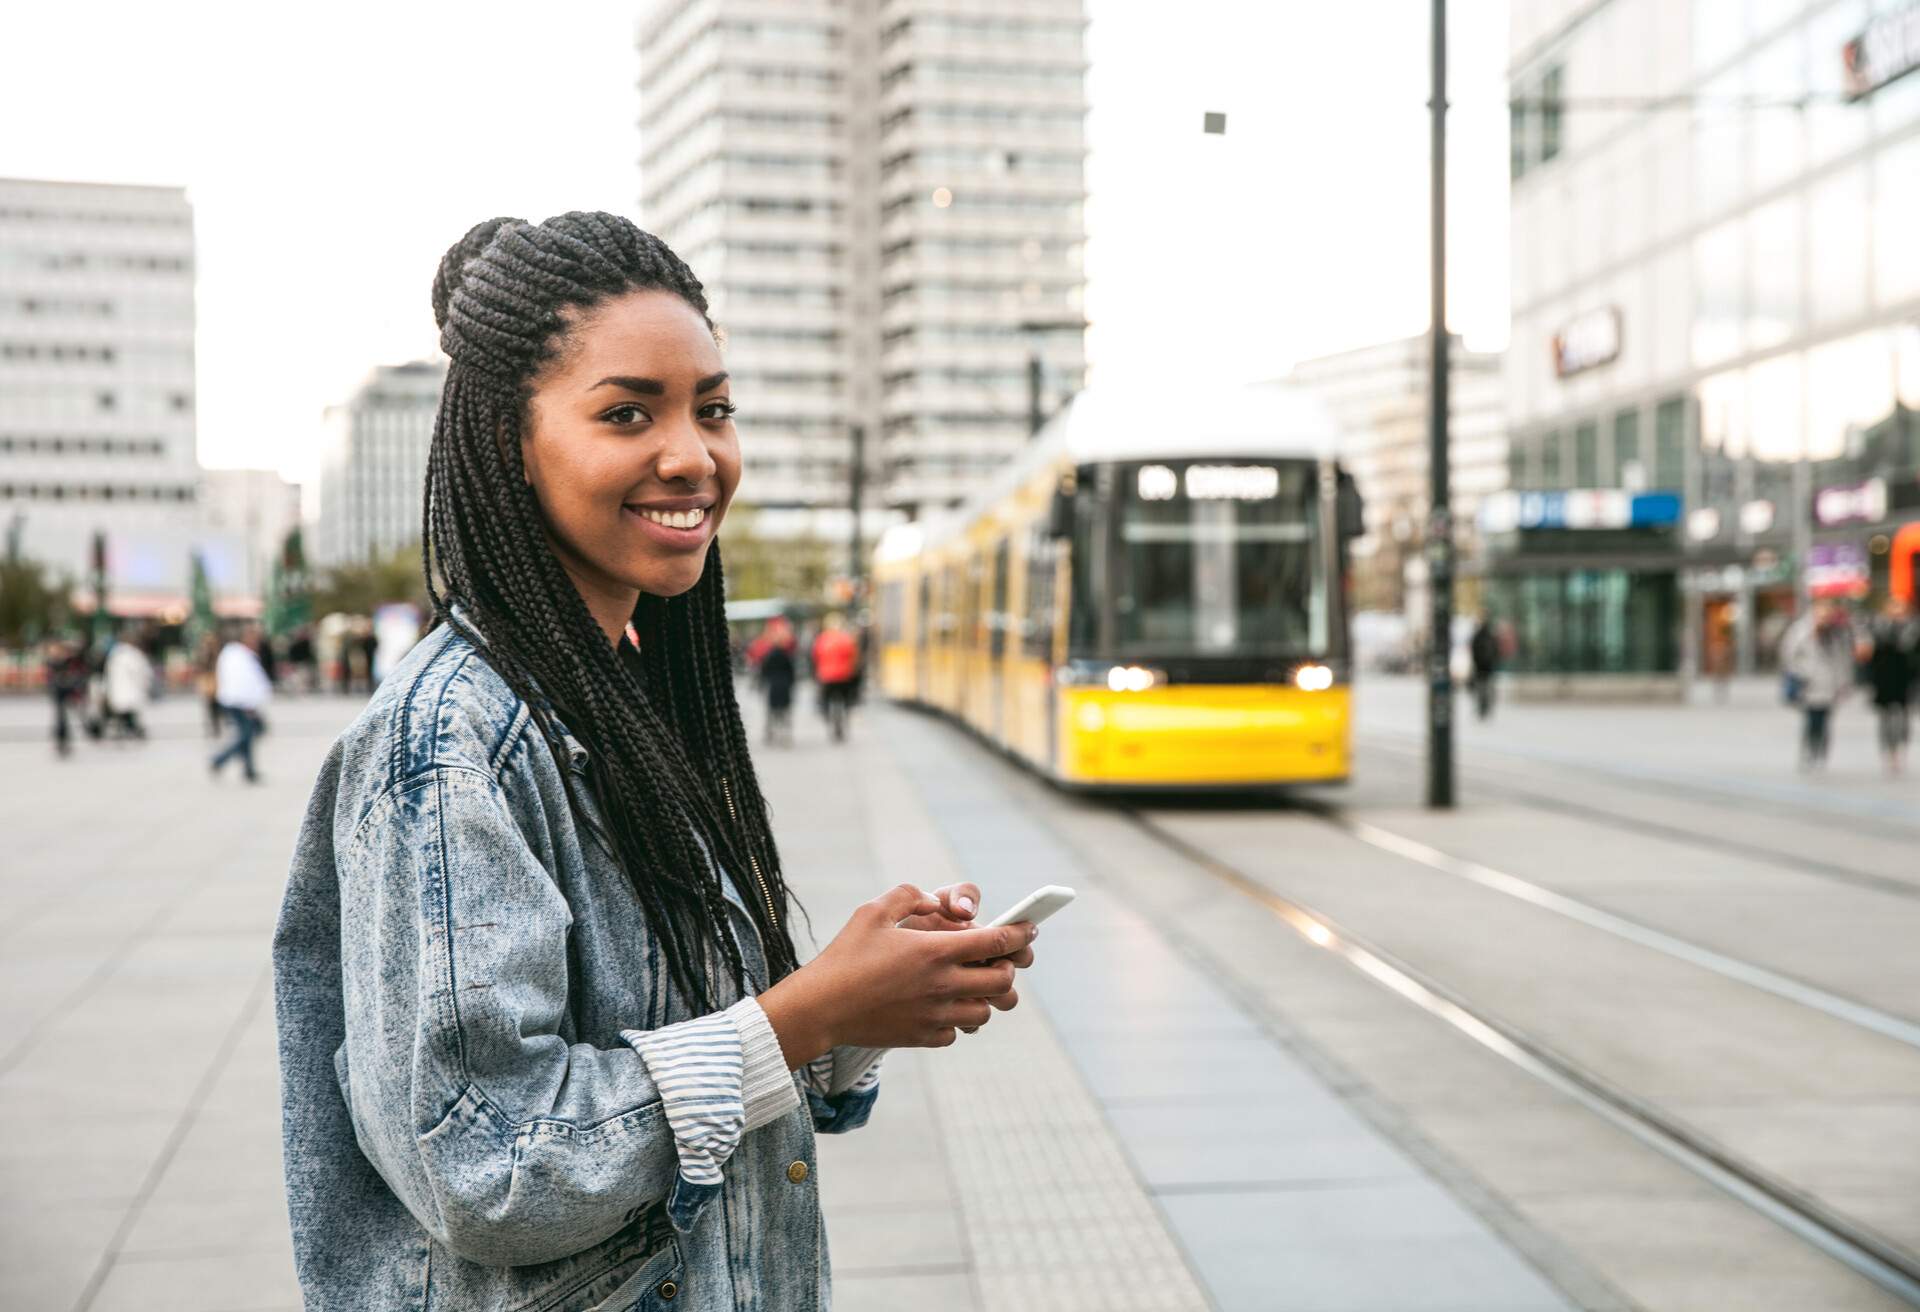 A woman with dreadlocks smiles while using her smartphone as she stands near an approaching yellow train.